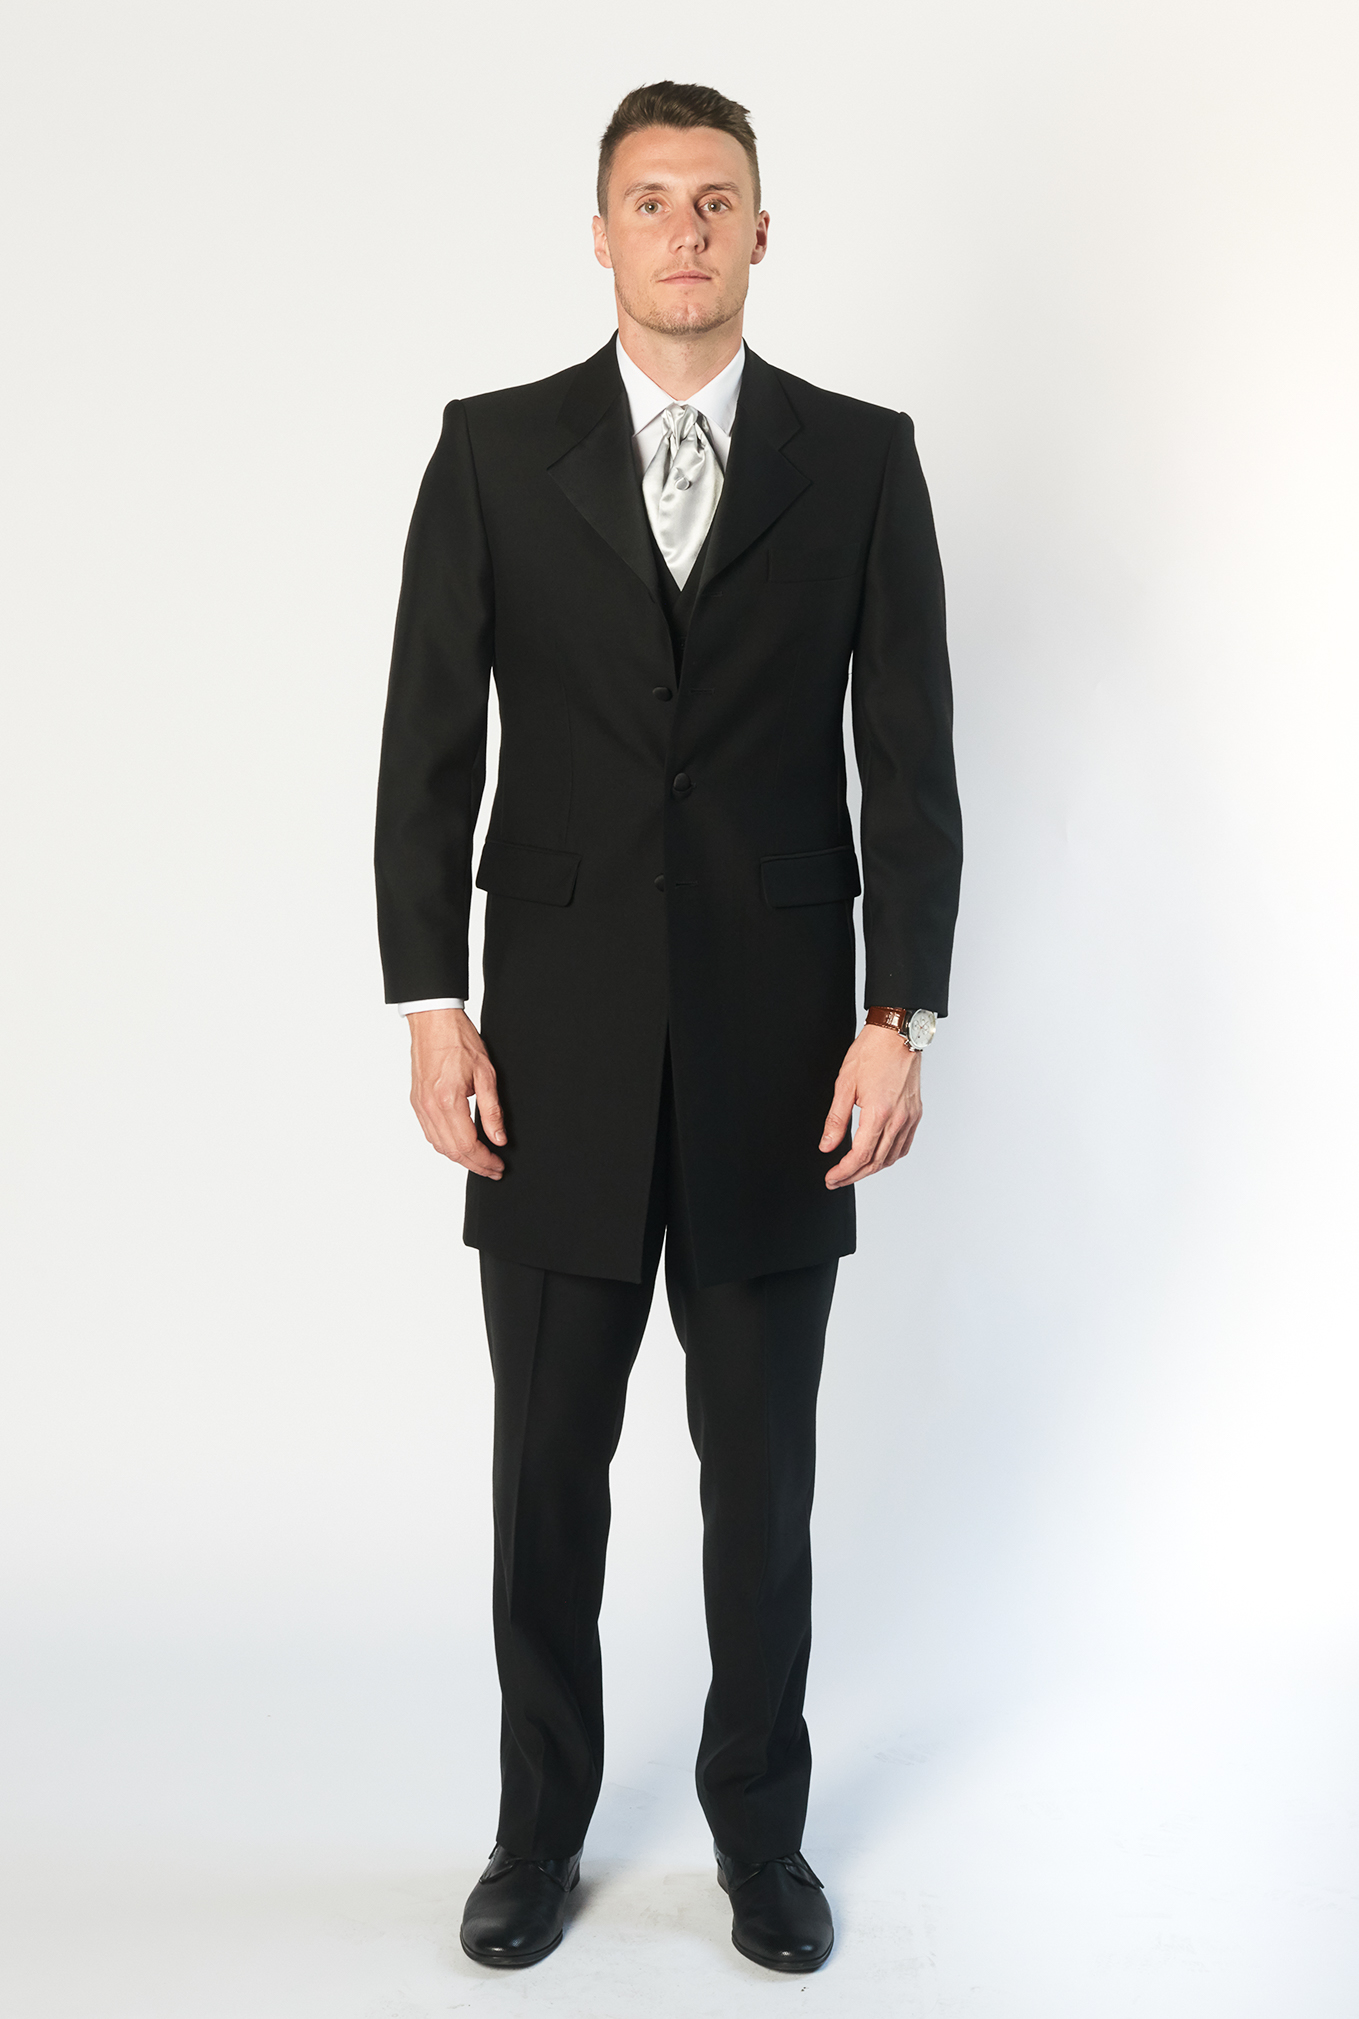 black coat and pants for hire brittons formal wear